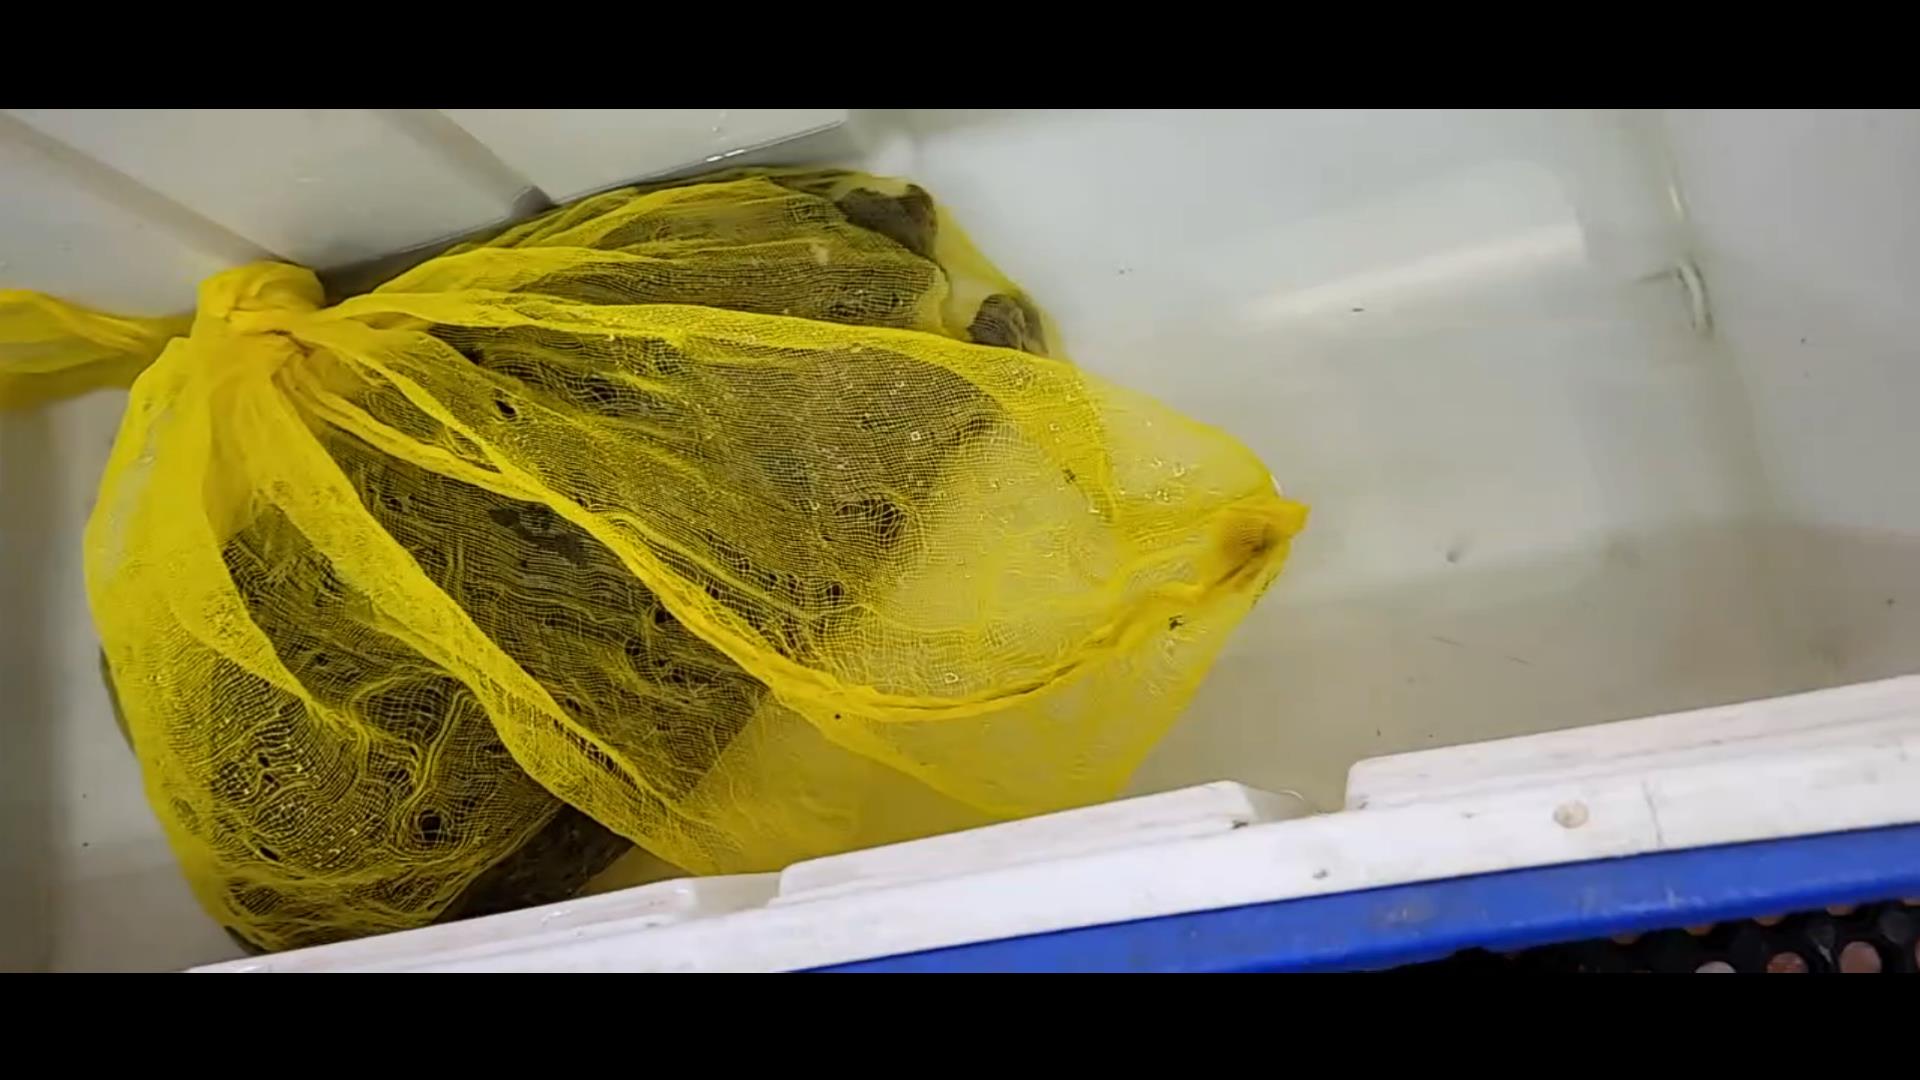 A softshell turtle trapped in a mesh bag inside a cooler